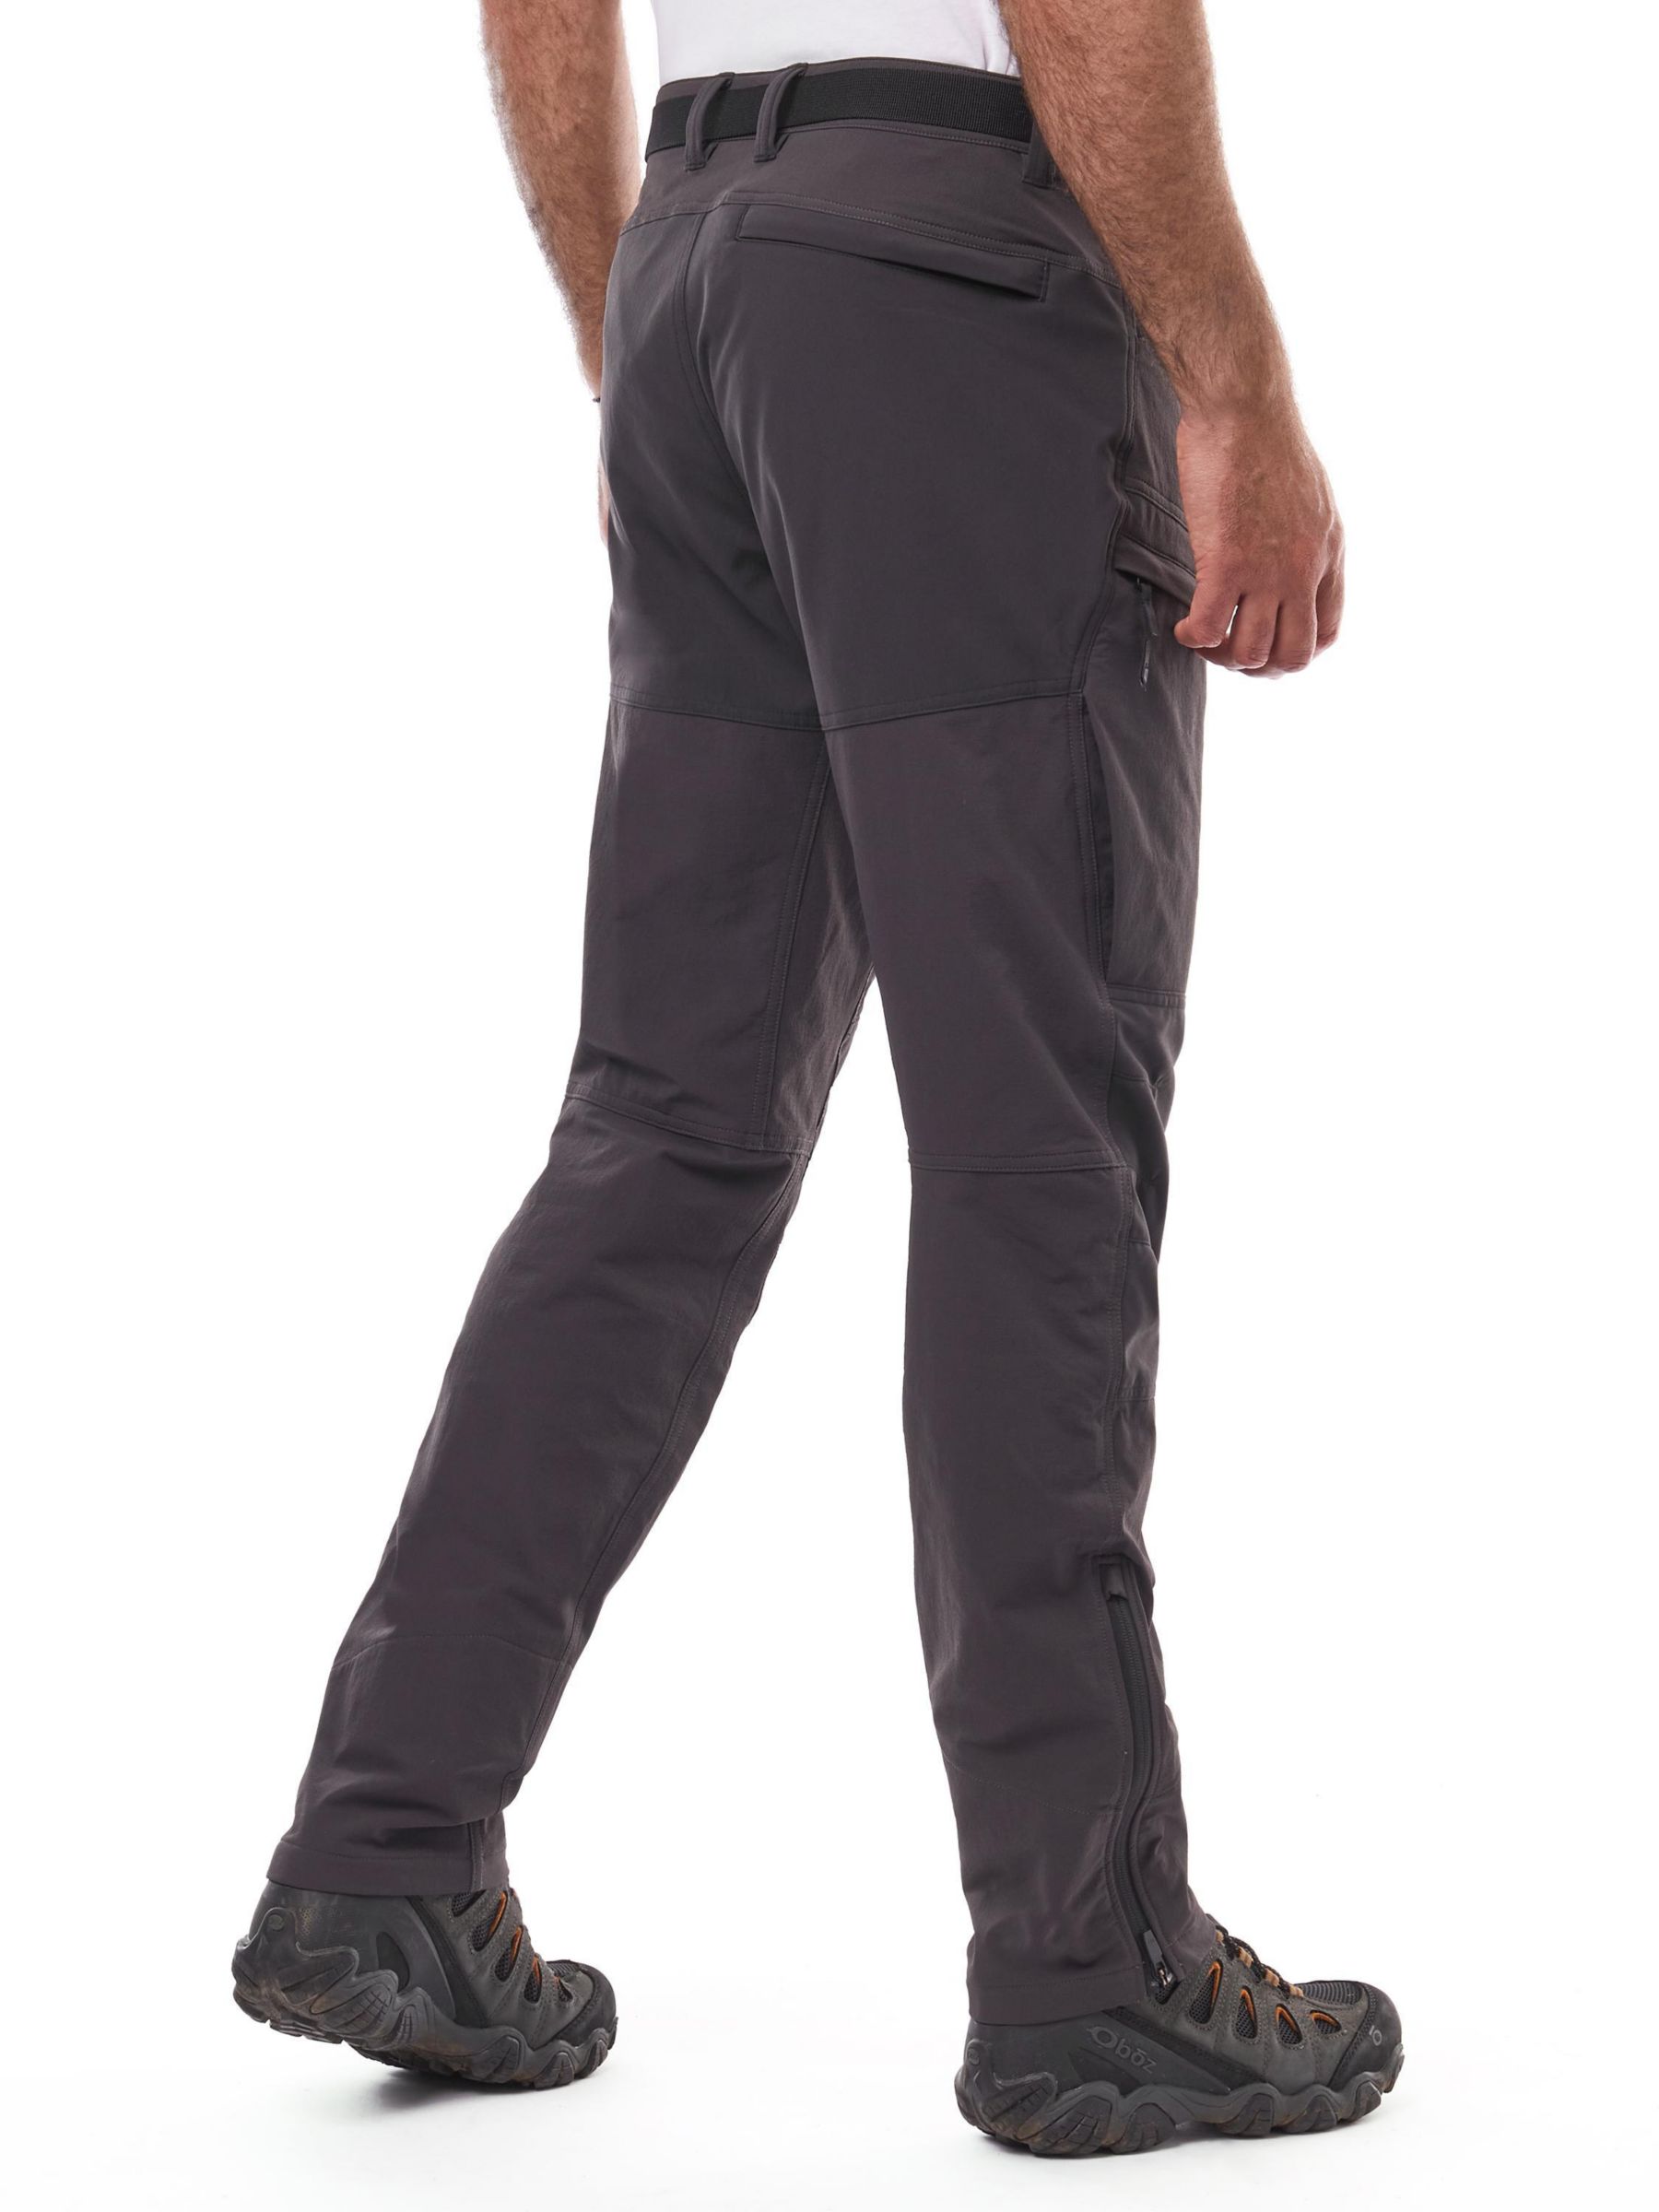 Buy Rohan Fjell Hiking Trousers Online at johnlewis.com